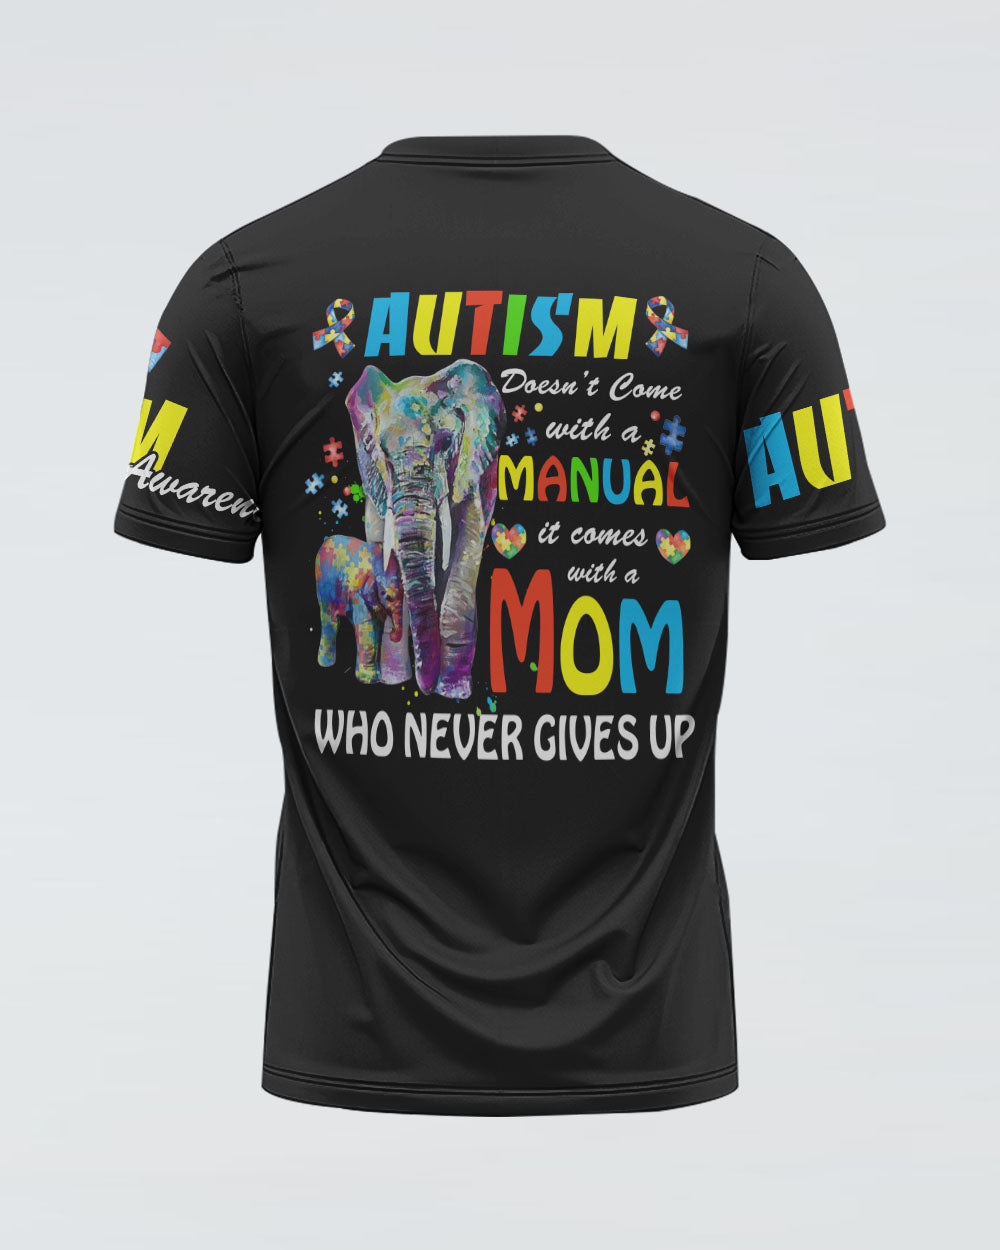 Autism Doesn't Come With Manual Women's Autism Awareness Tshirt